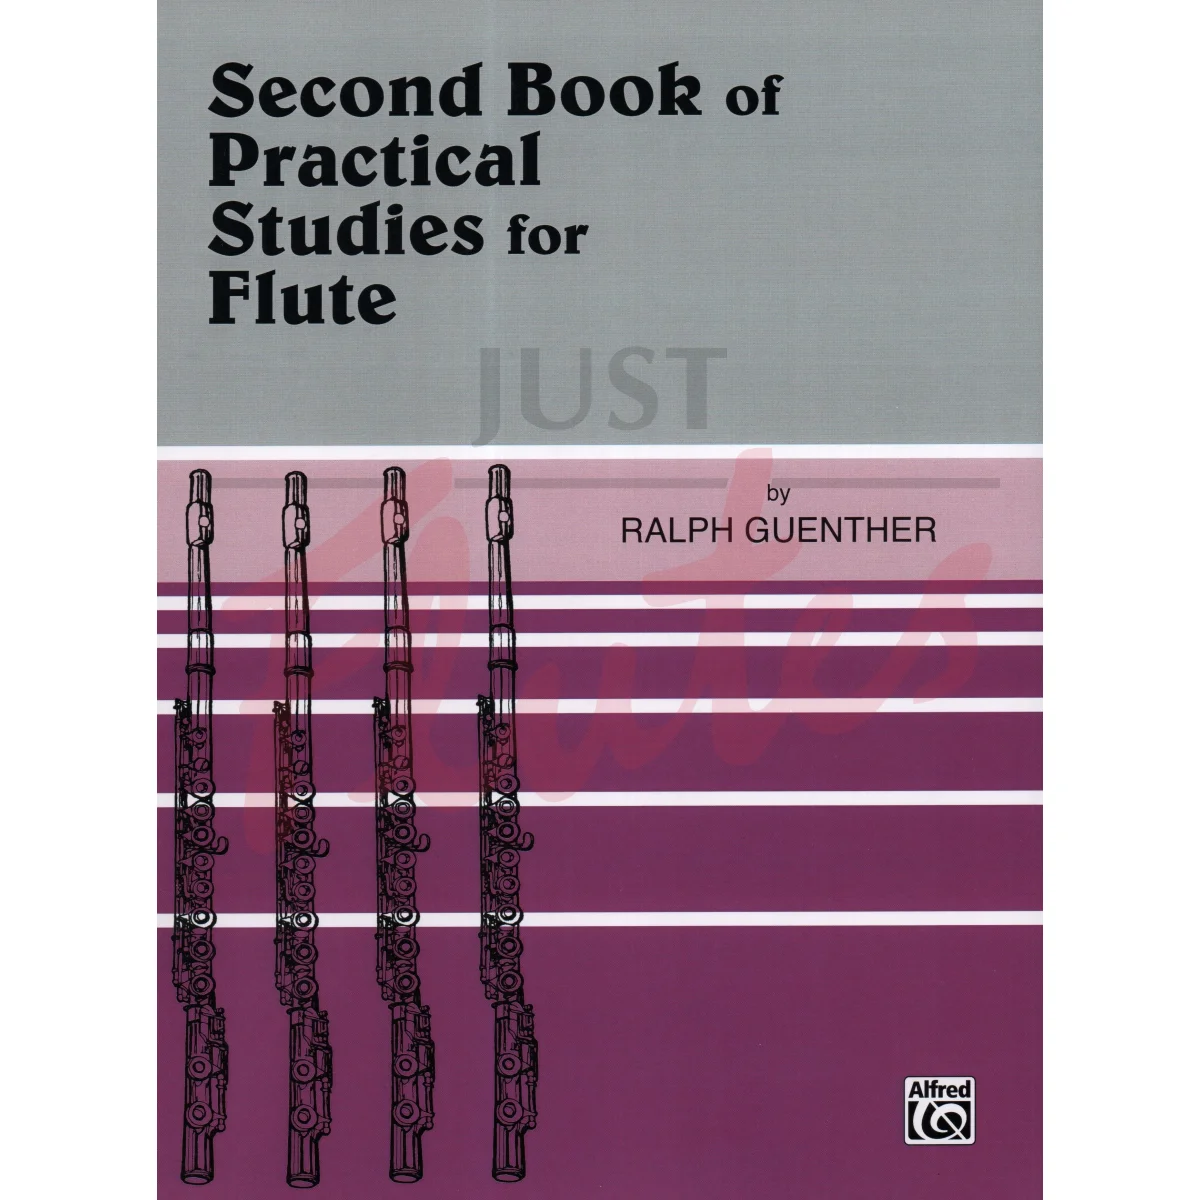 Second Book of Practical Studies for Flute